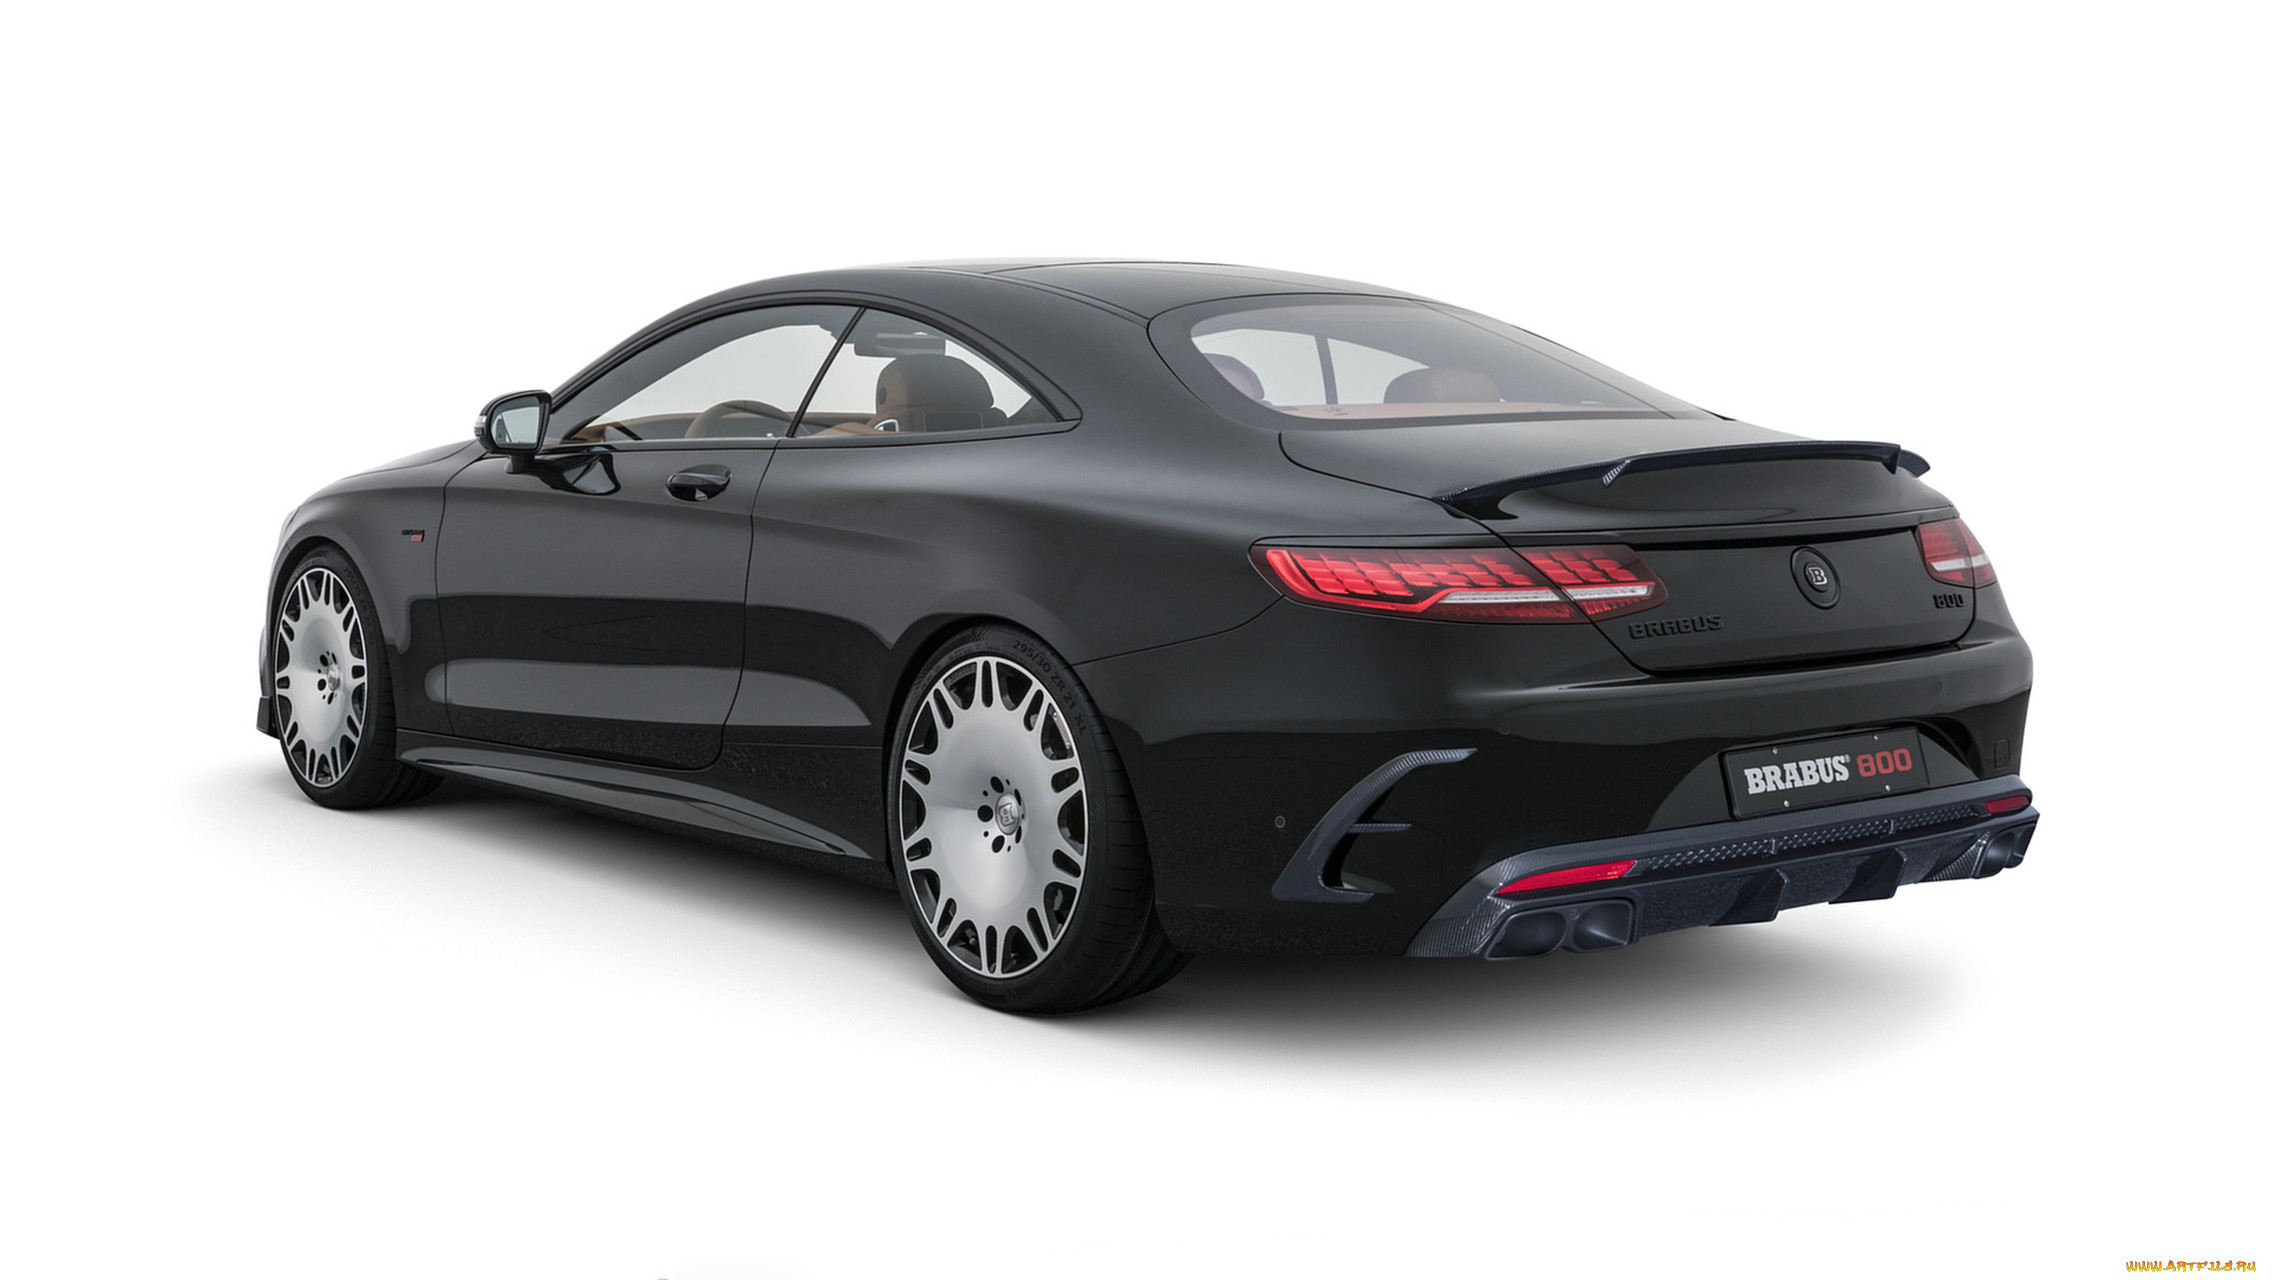 brabus 800 coupe based on mercedes-benz amg s-63 4matic coupe 2018, , brabus, amg, mercedes-benz, based, coupe, 2018, 800, 4matic, s-63